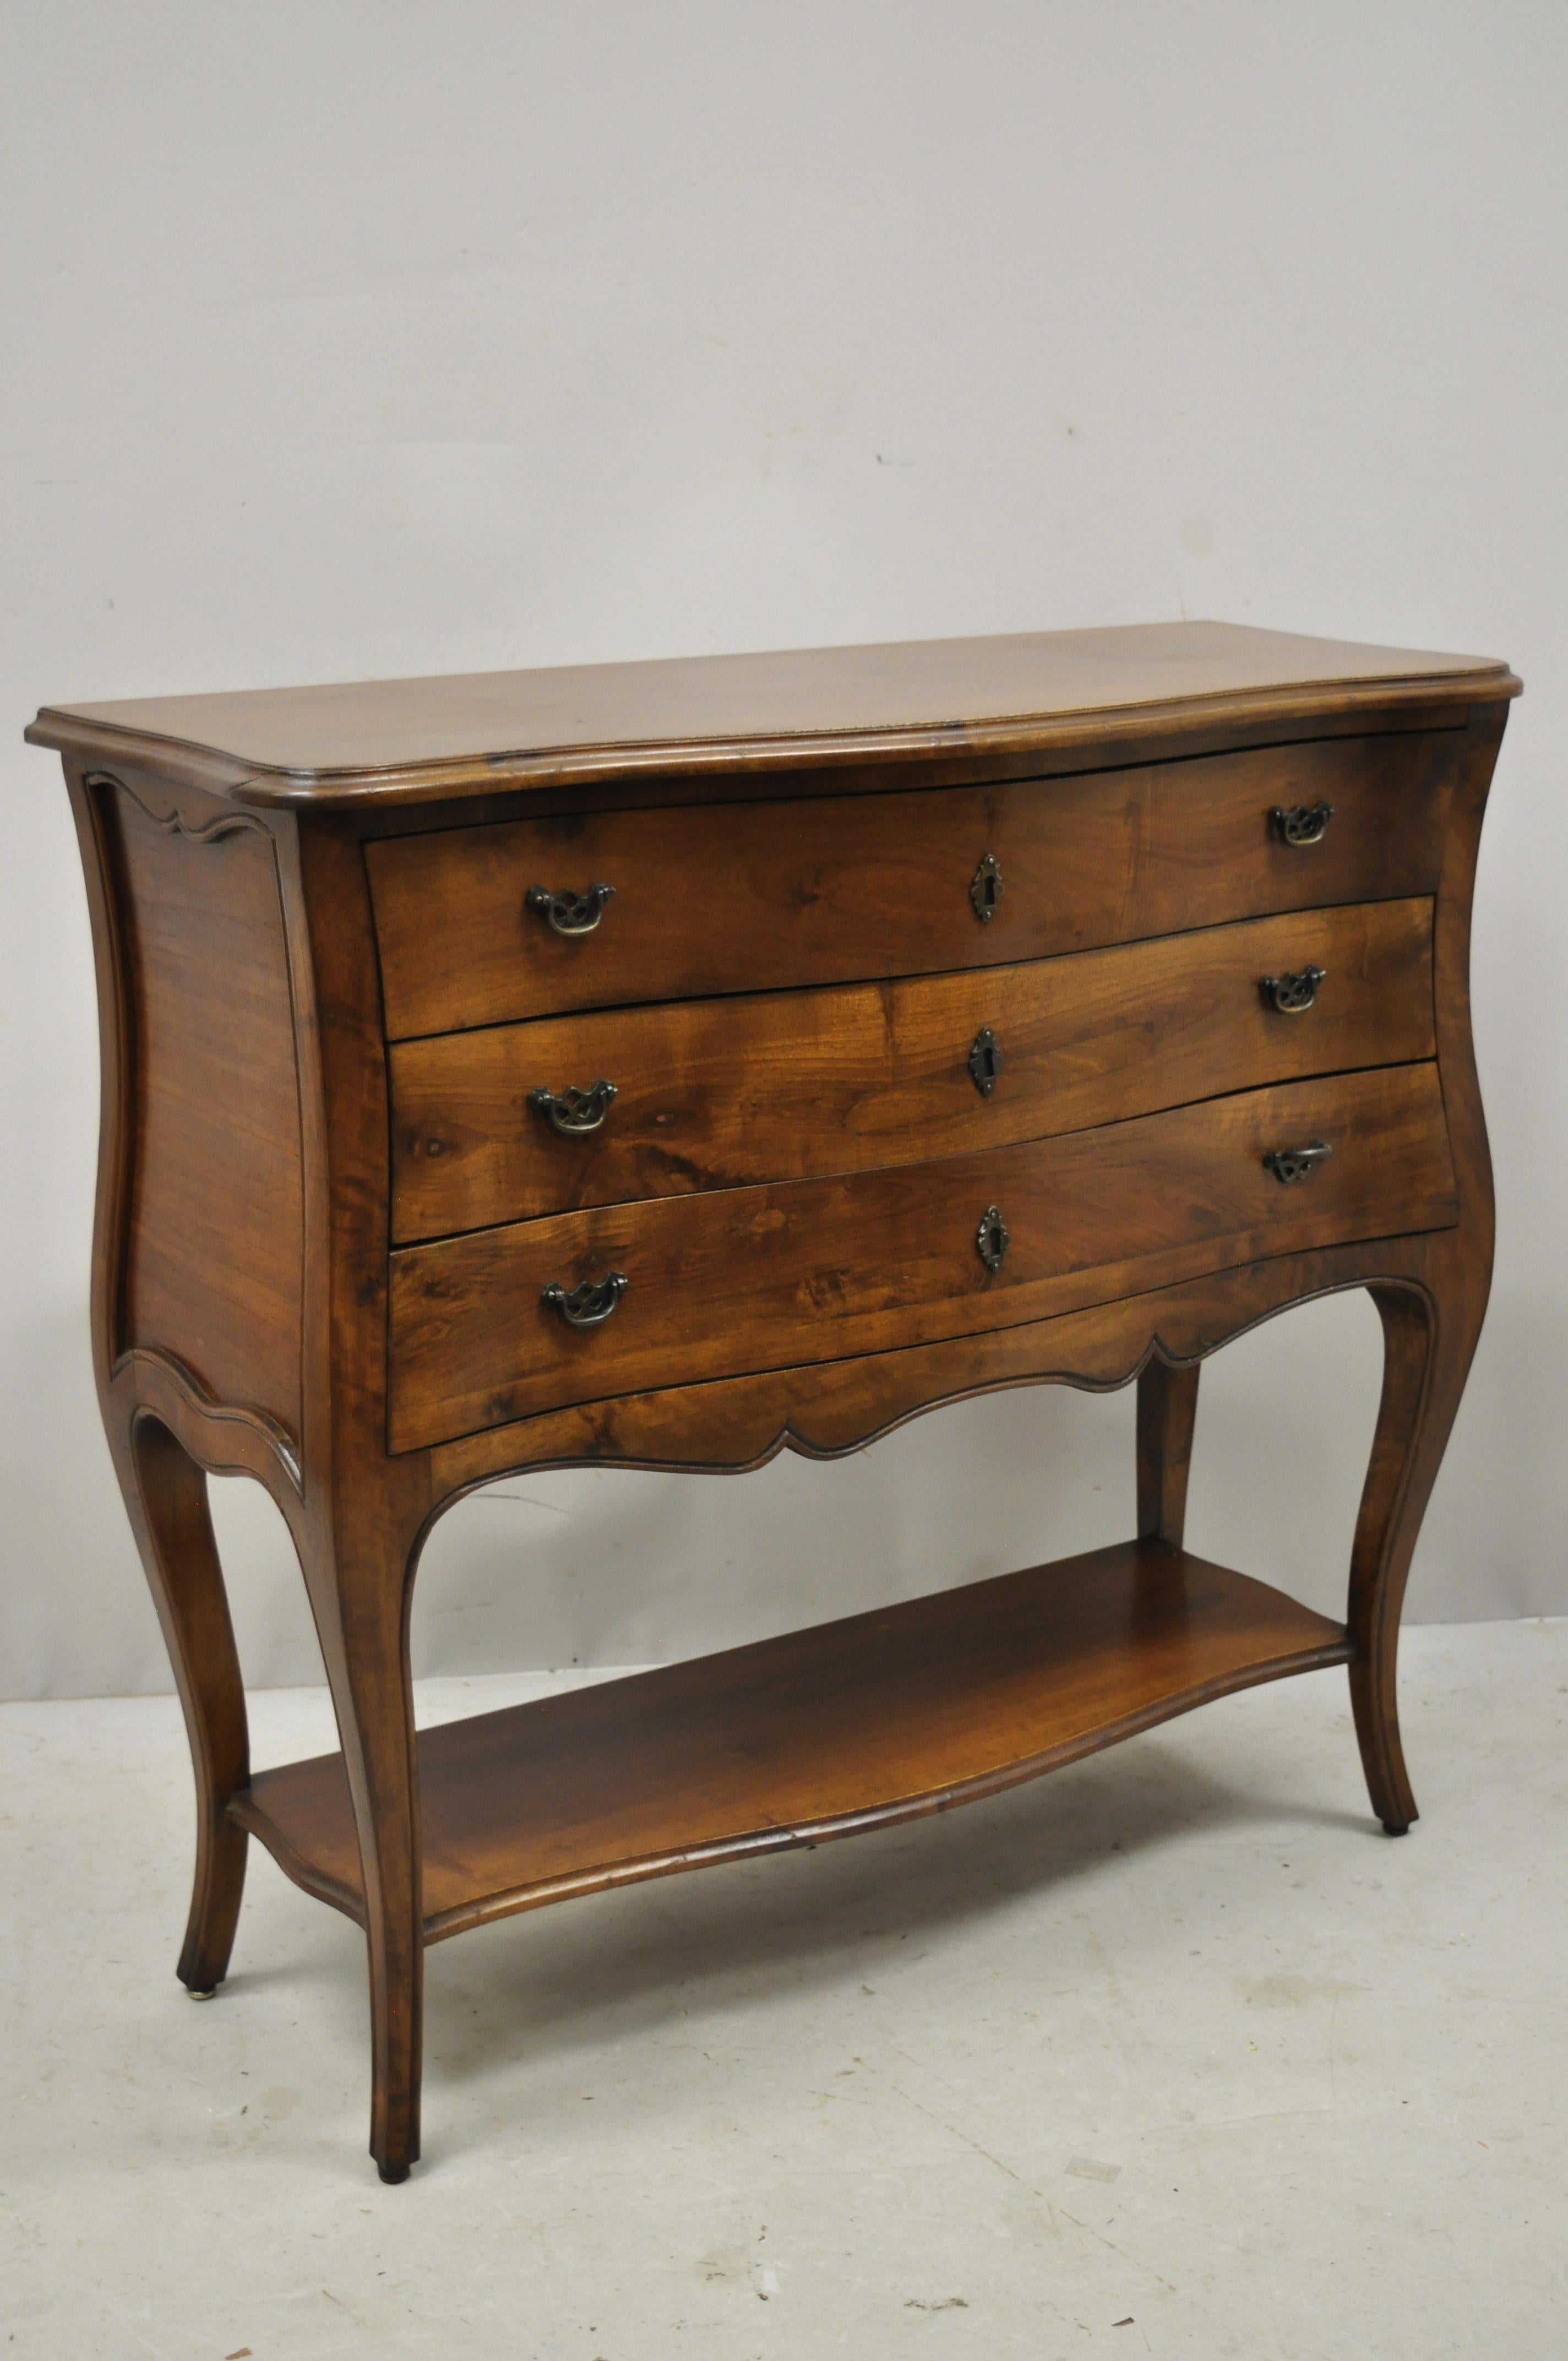 Italian Provincial French Louis XV style Cherrywood commode chest by B. Altman

Details: Lower shelf, solid wood construction, beautiful wood grain, original label, 3 dovetailed drawers, shapely cabriole legs, quality Italian craftsmanship, great